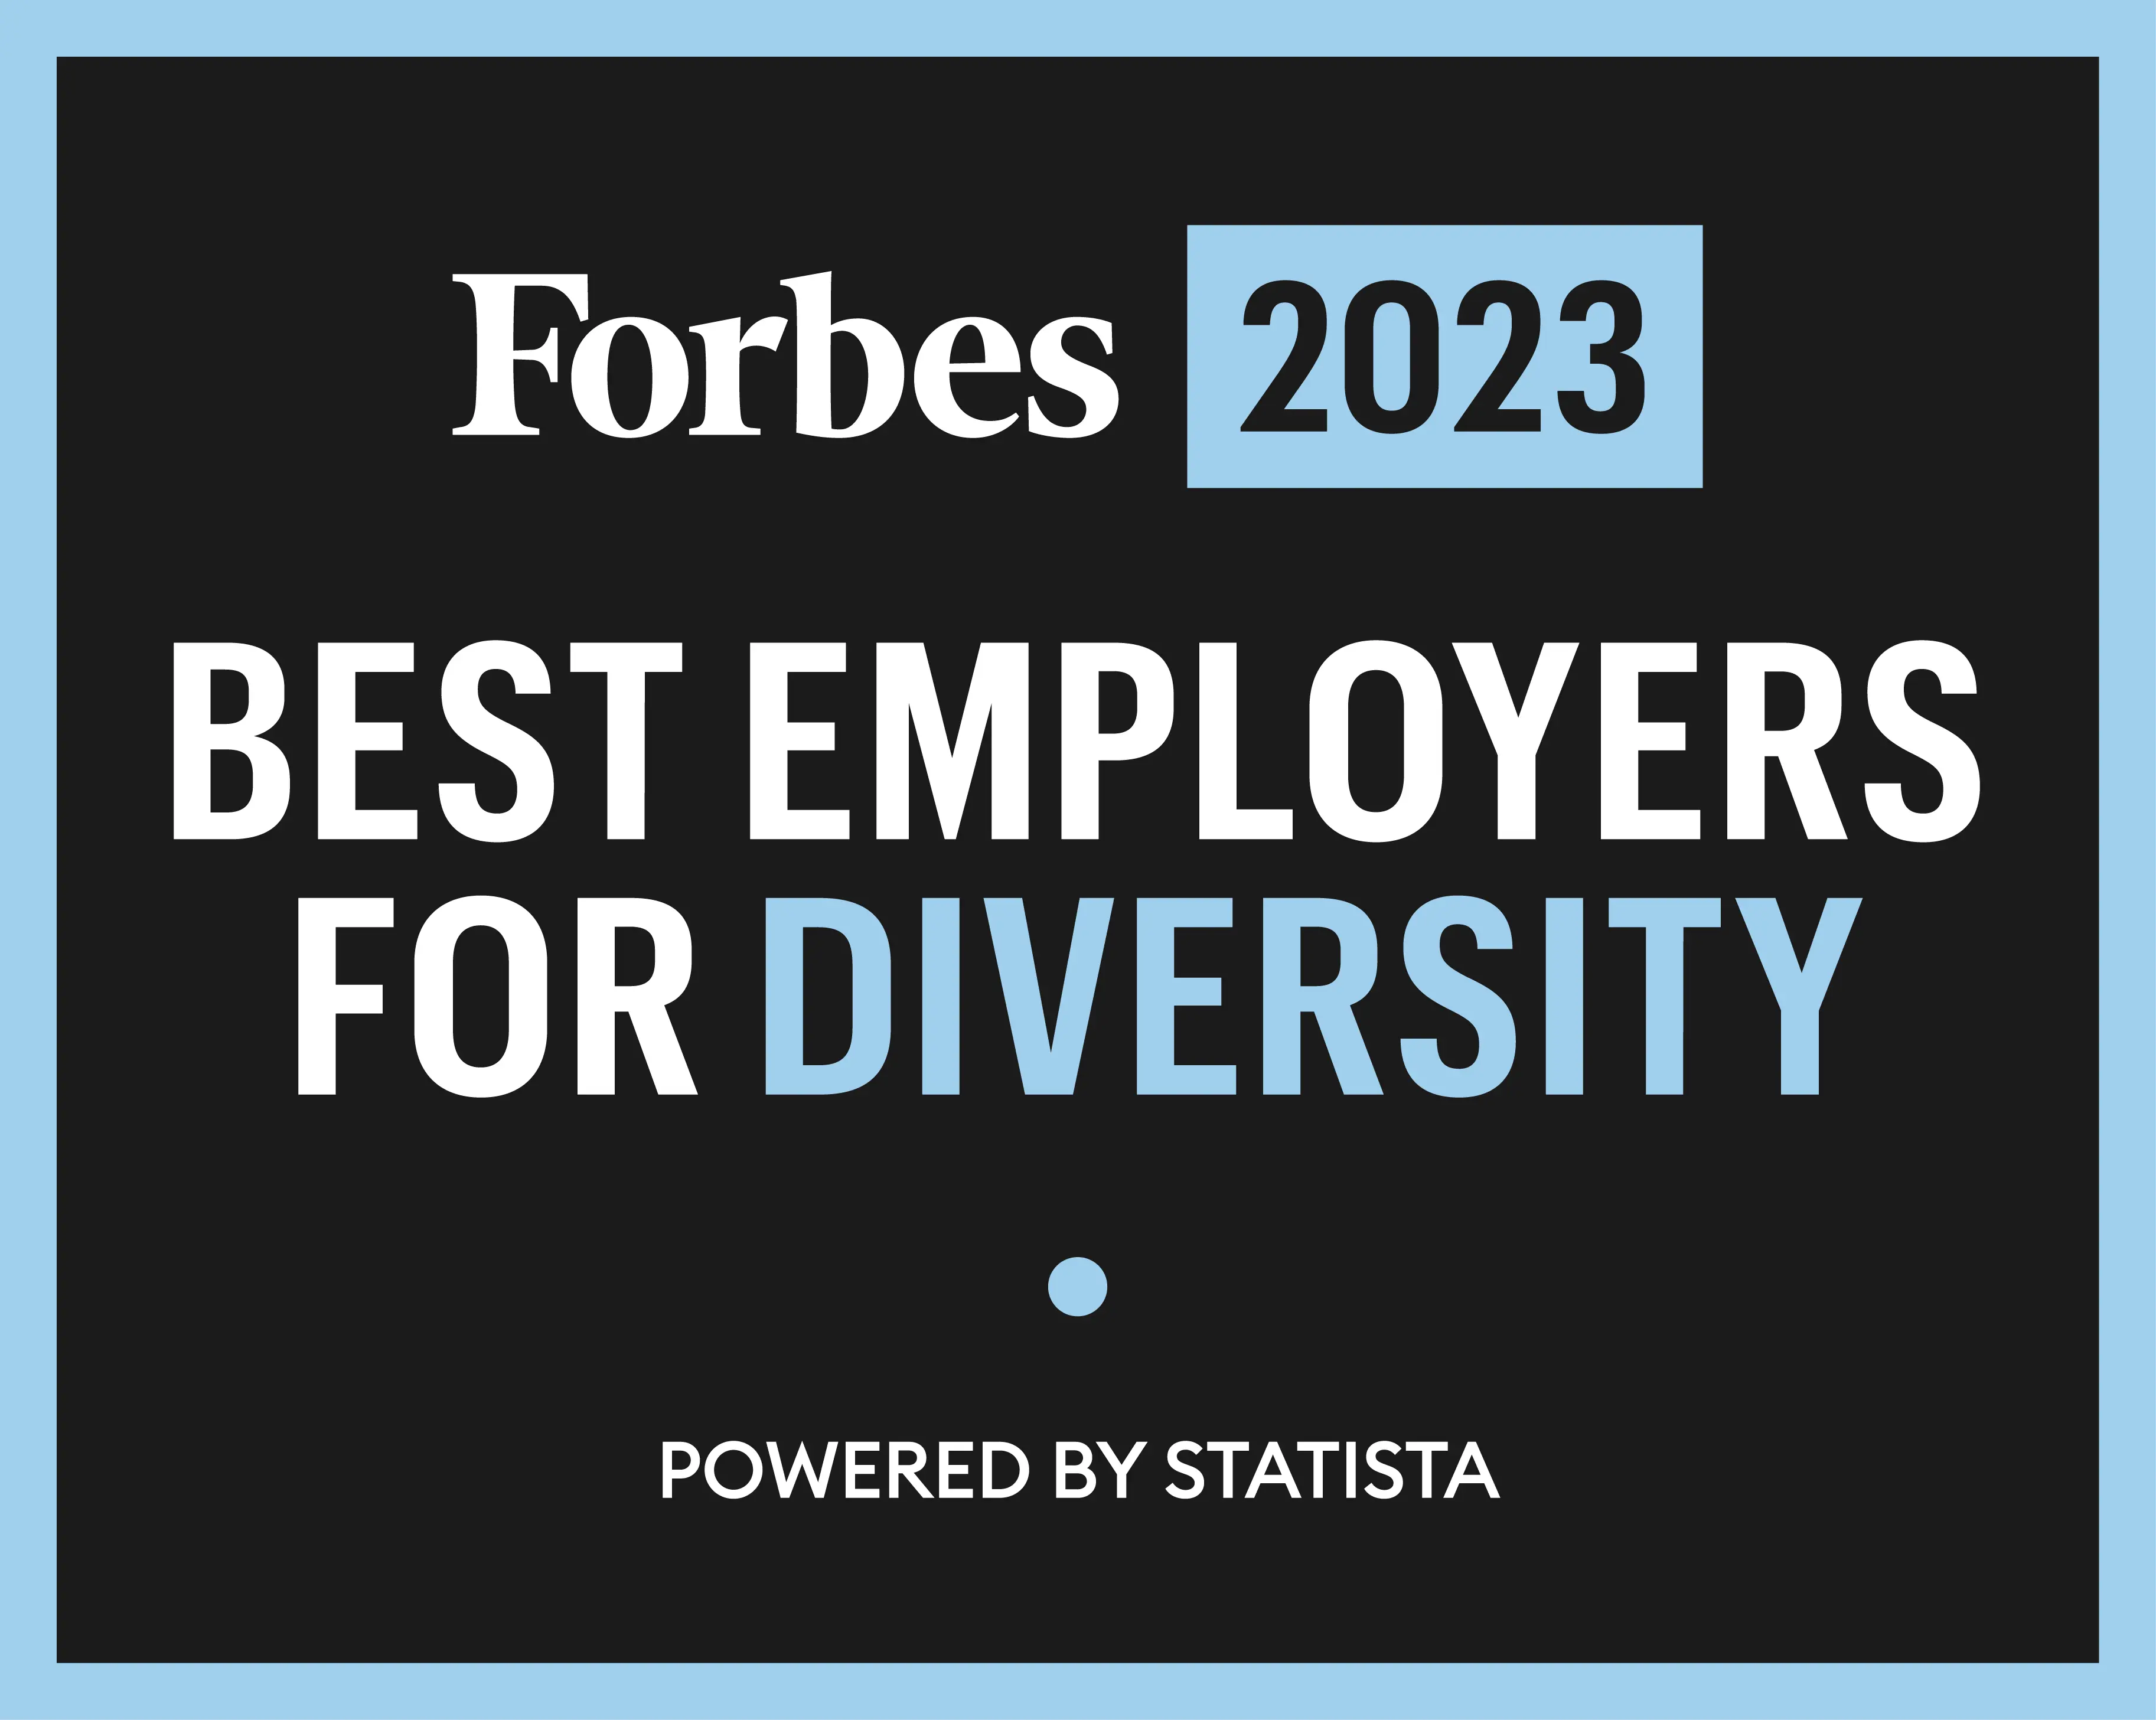 Forbes 2023 BEST EMPLOYERS FOR DIVERSITY 2023